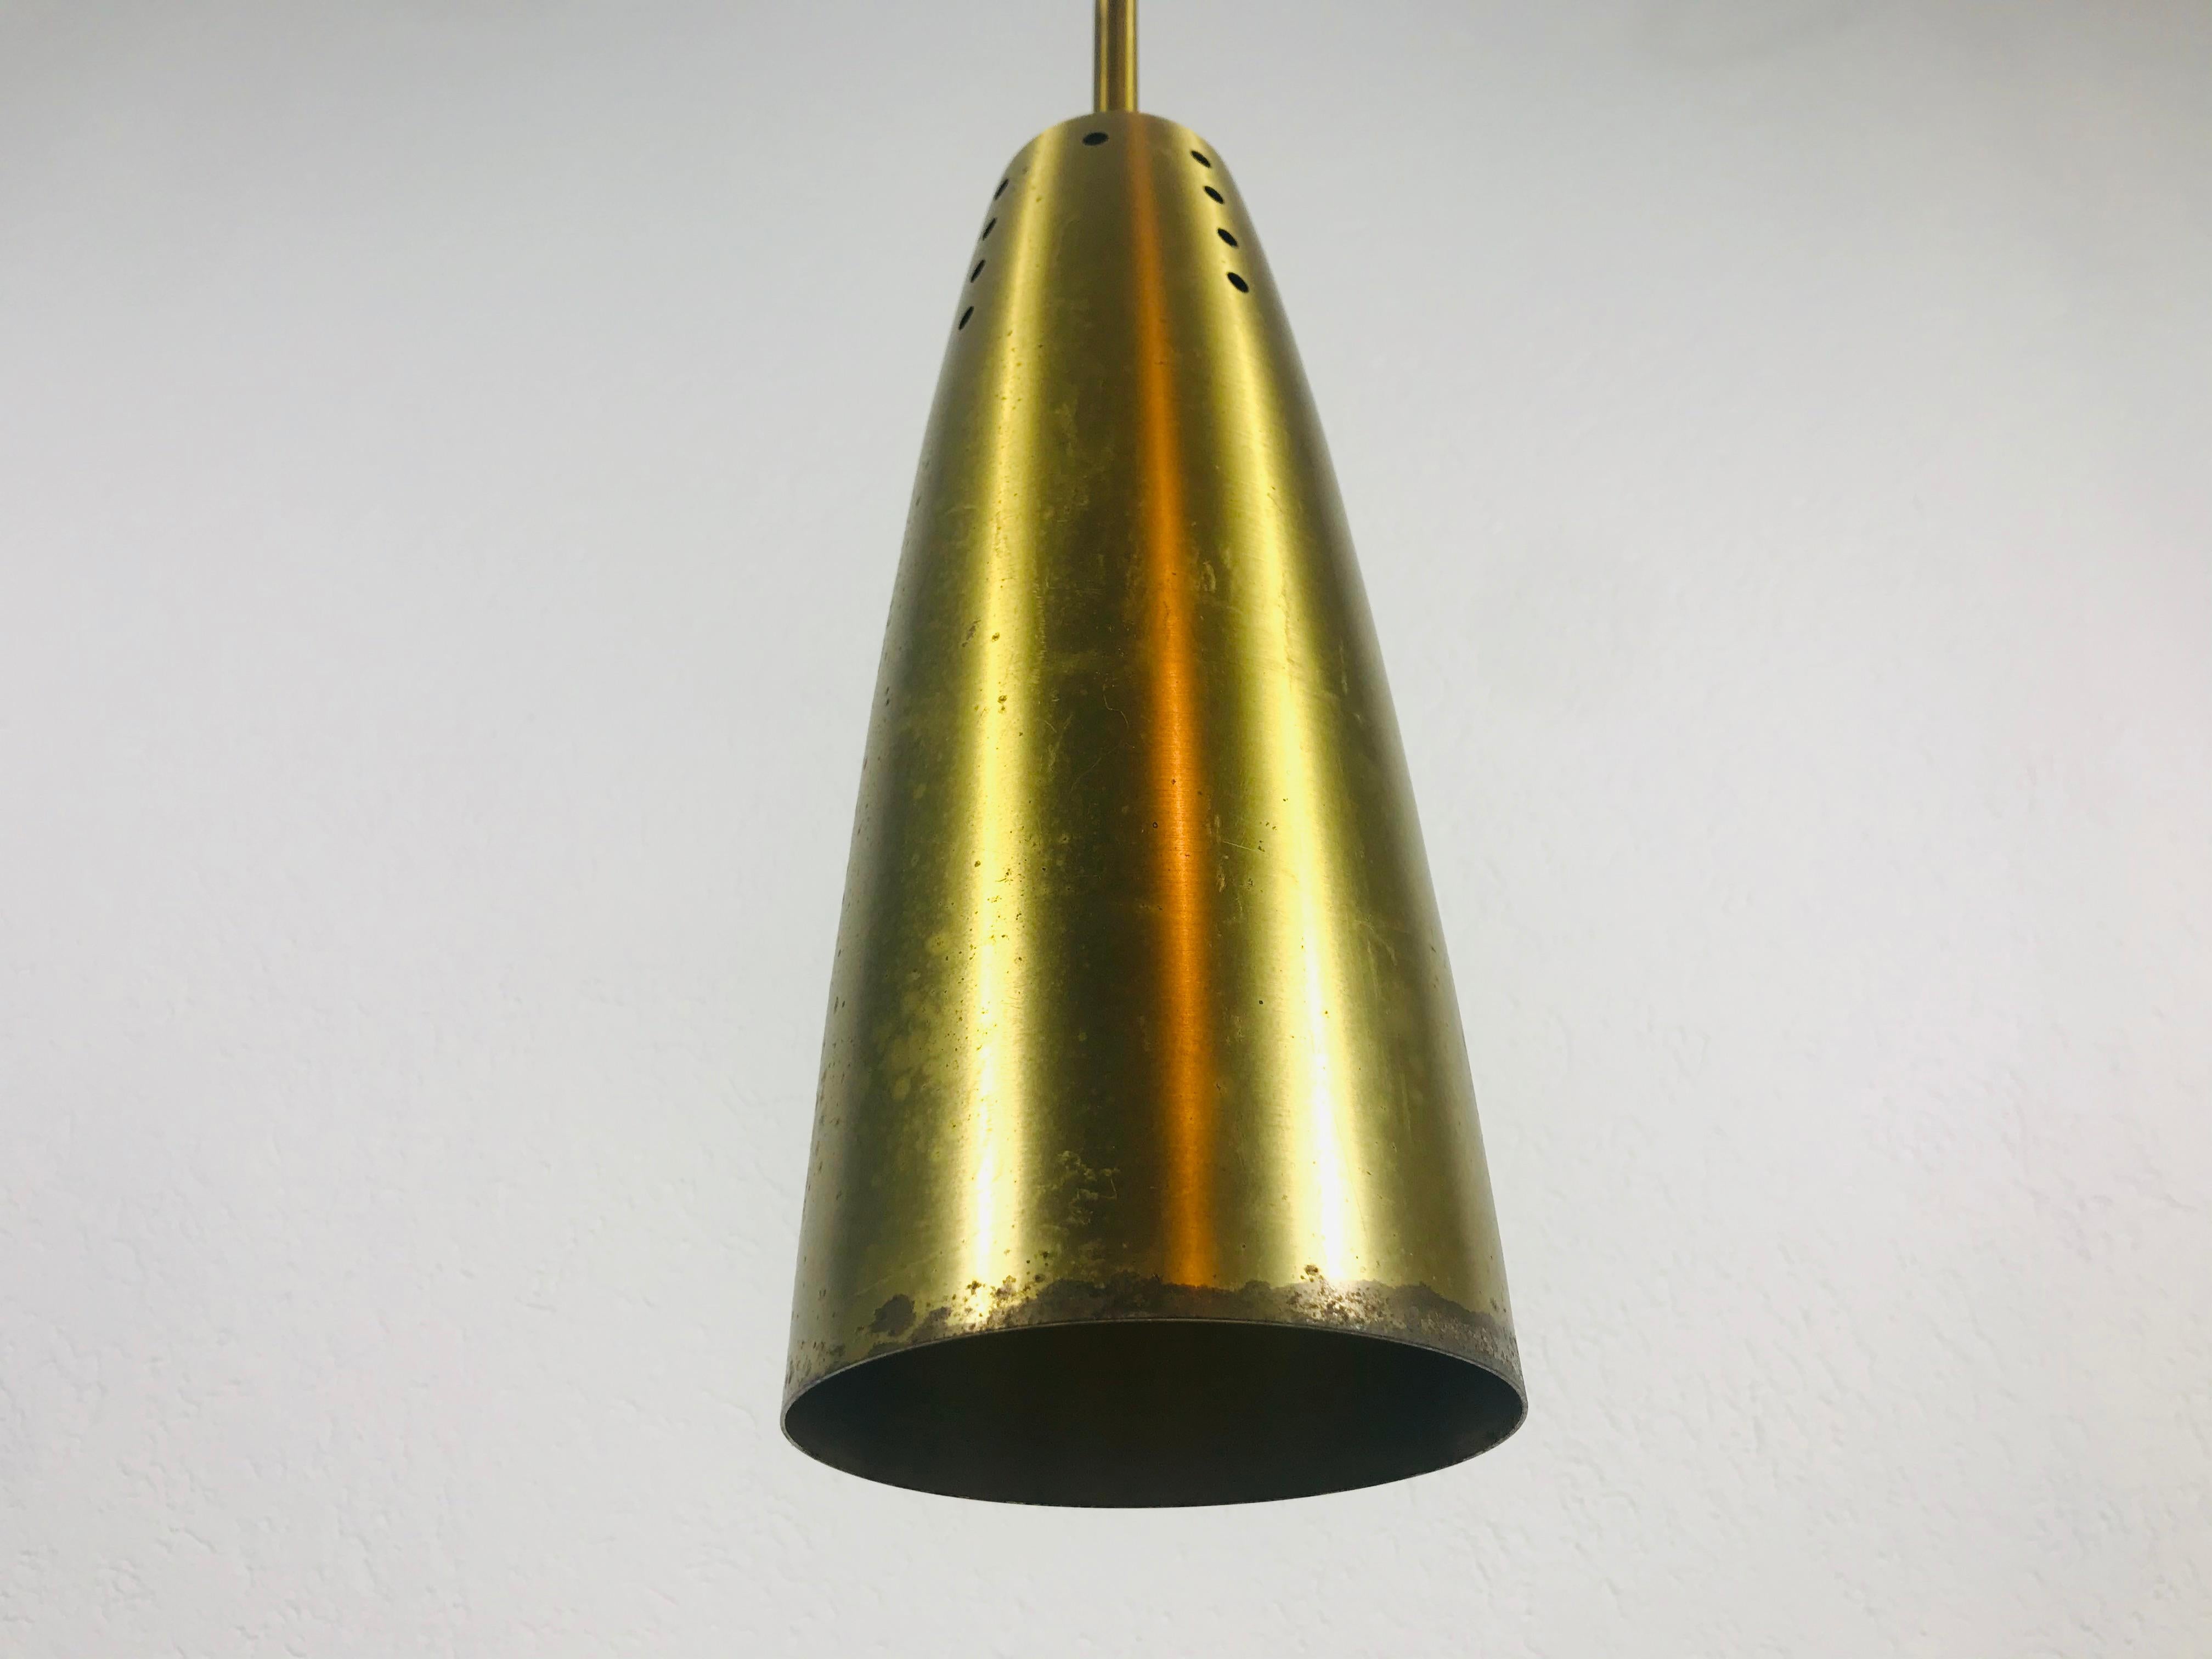 Pair of Full Brass Mid-Century Modern Pendant Lamps, 1950s, Germany For Sale 2